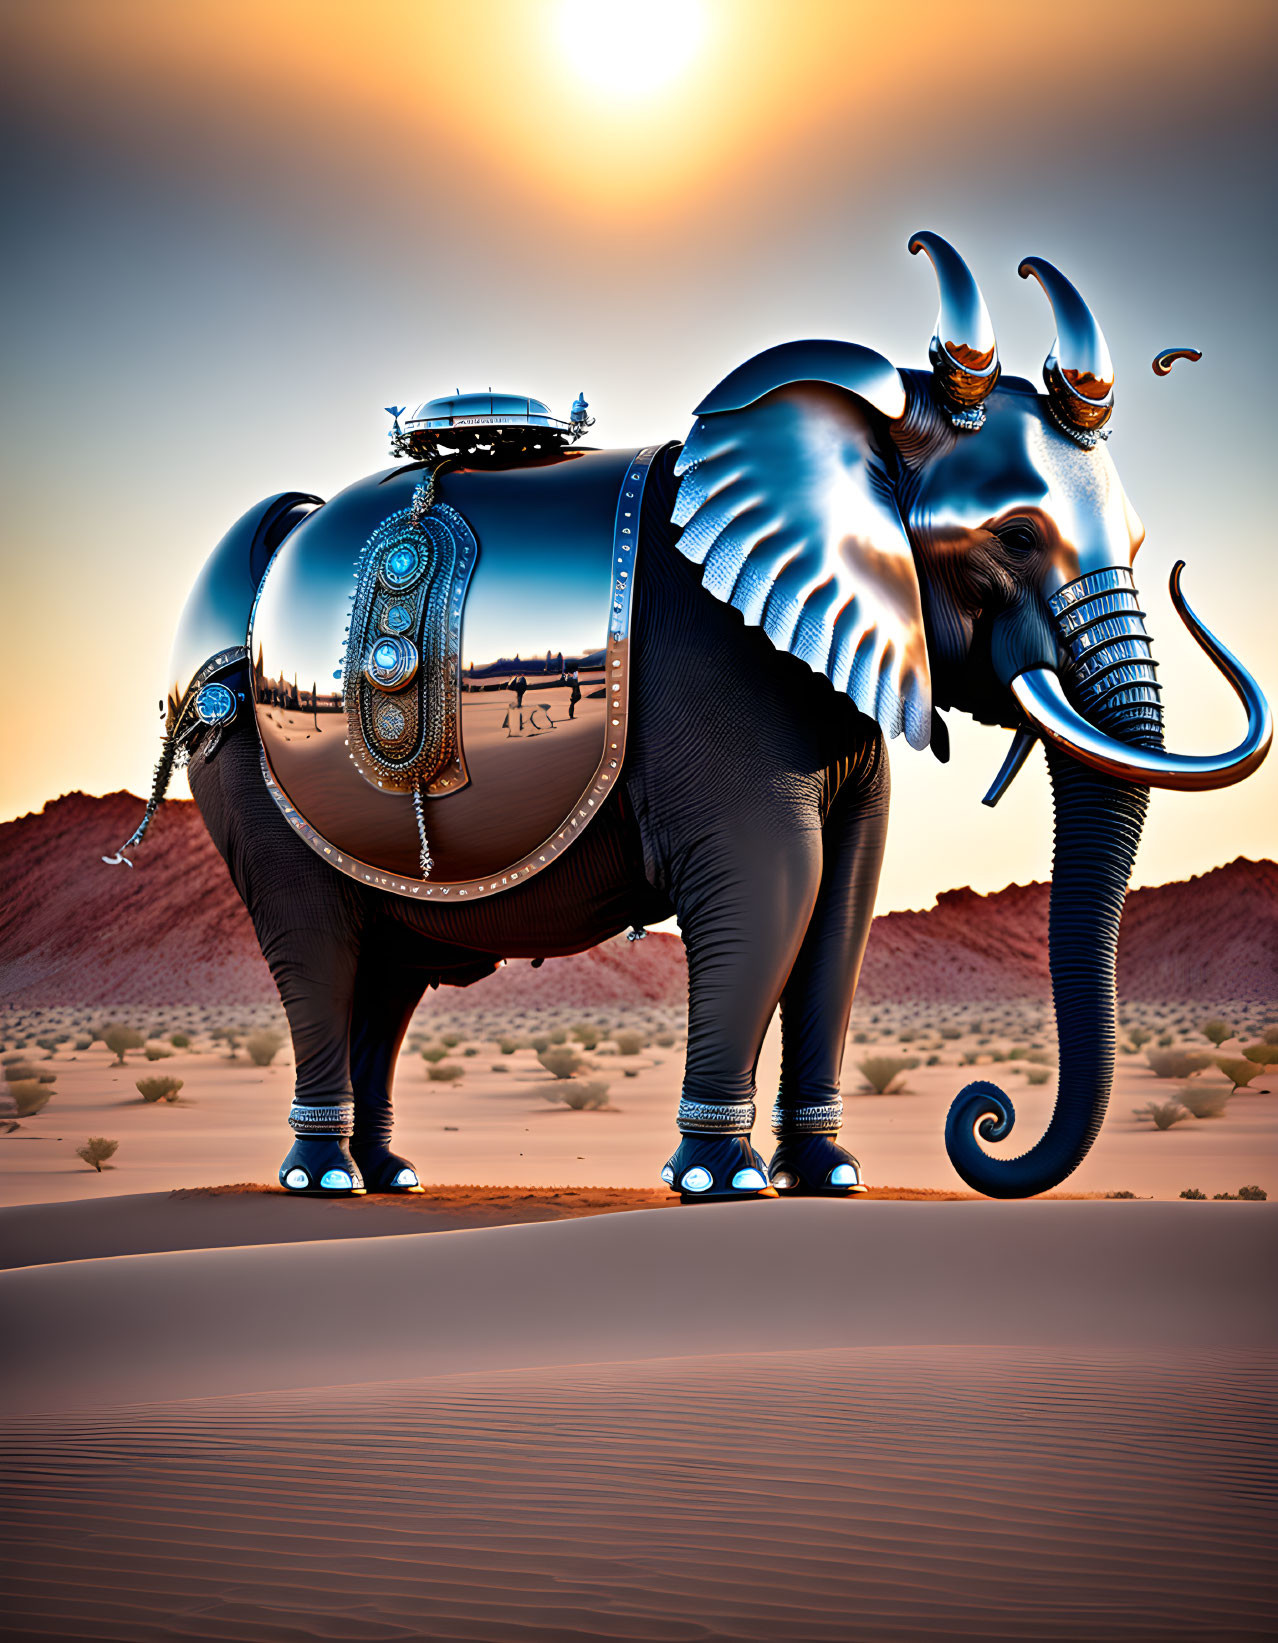 Surreal digital art: Elephant with mechanical parts in desert twilight